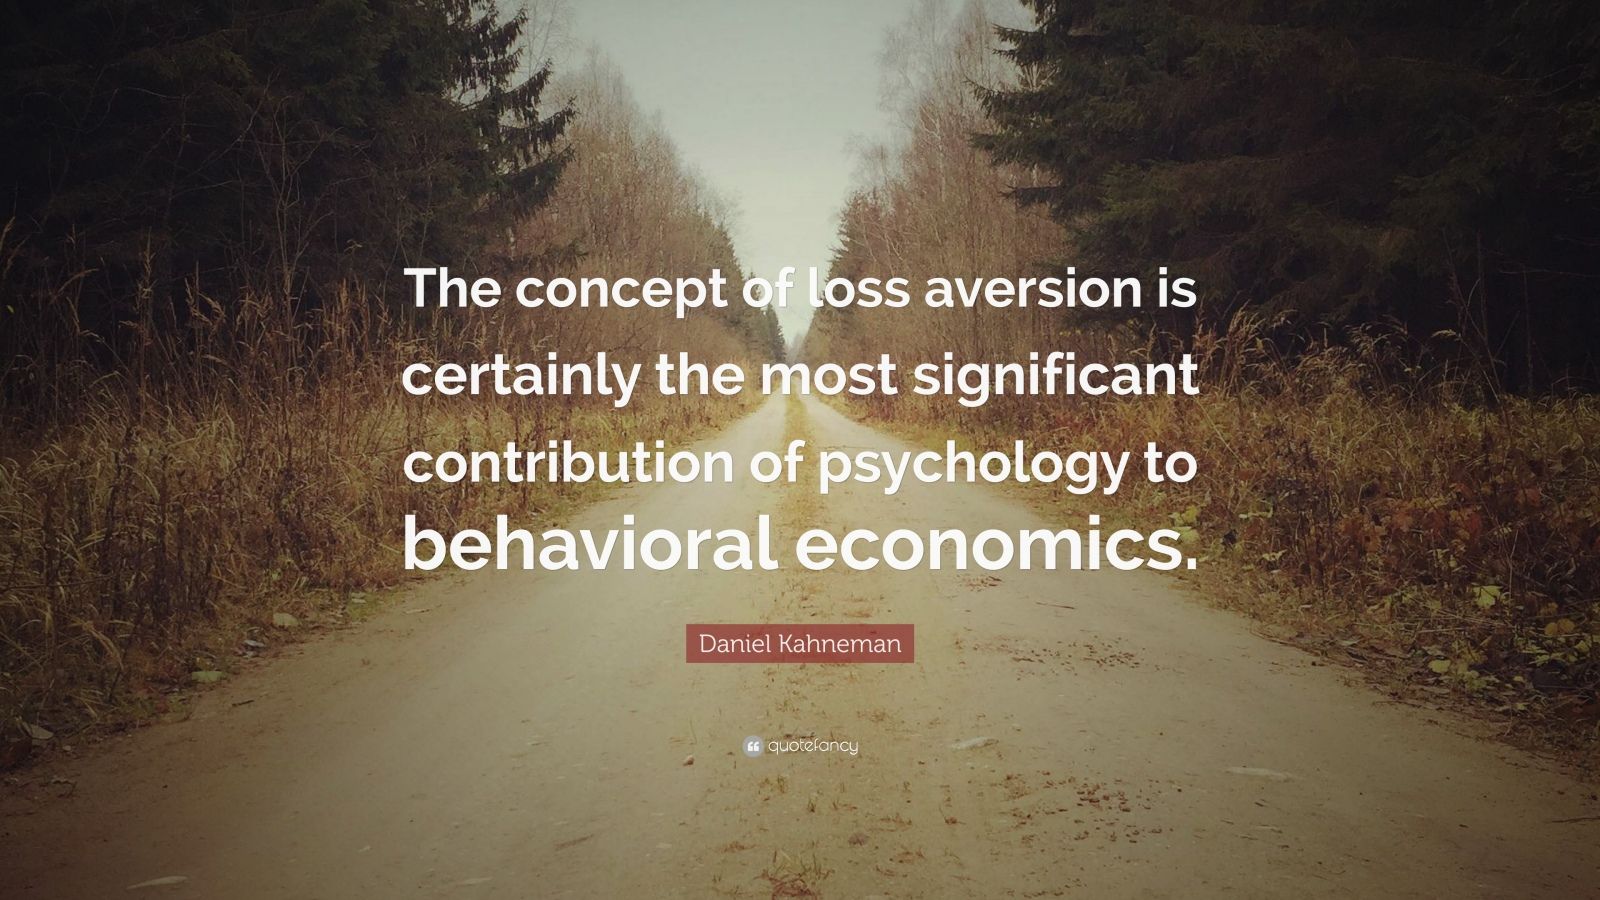 Daniel Kahneman Quote: “The concept of loss aversion is certainly the